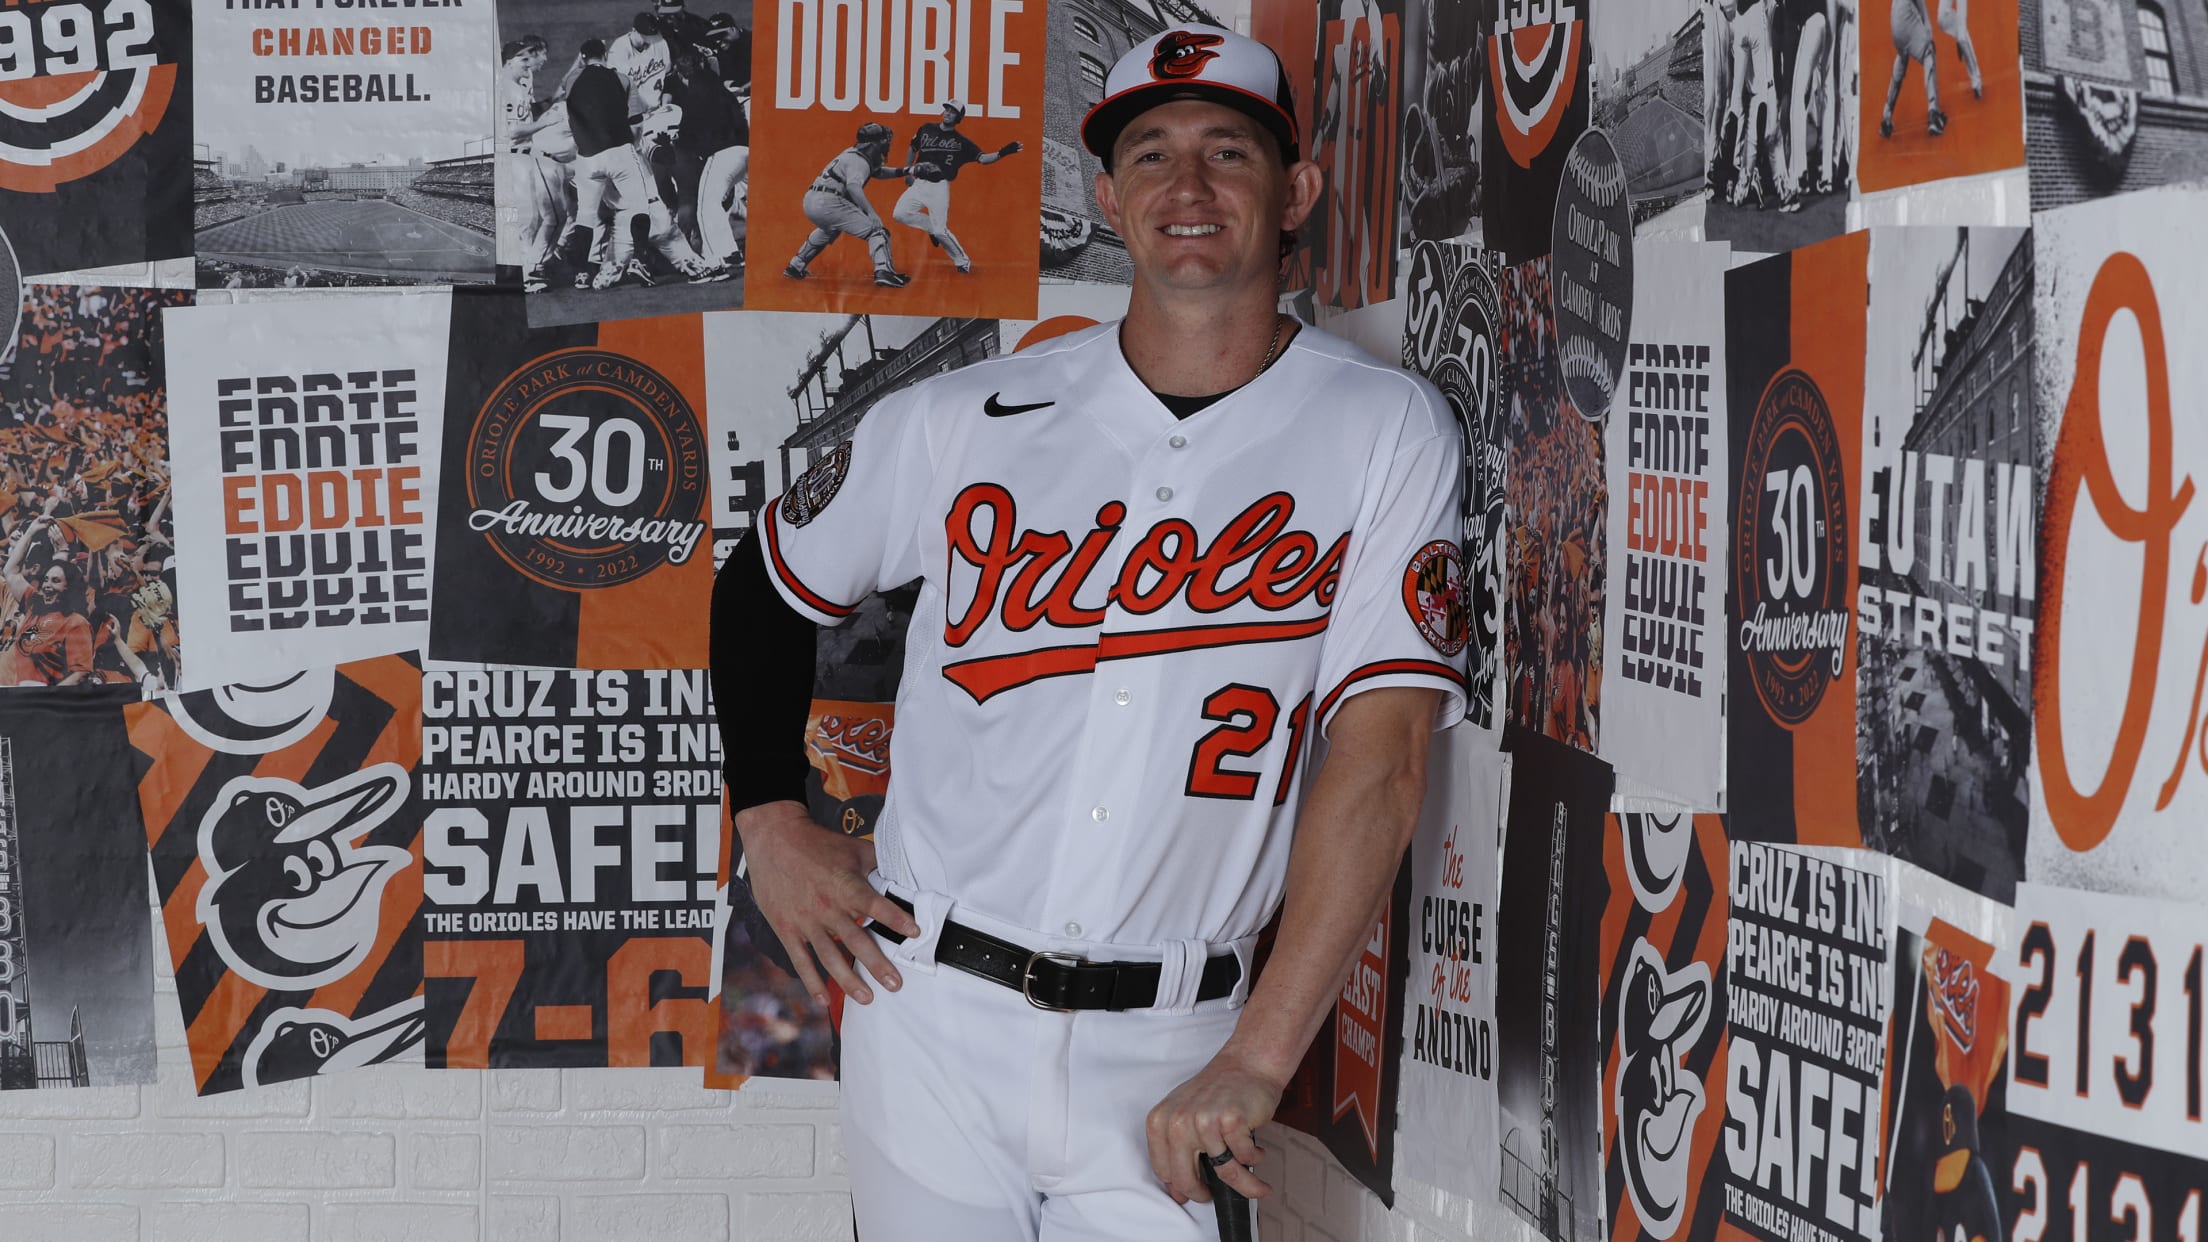 Baltimore Orioles: Austin Hays 2023 - Officially Licensed MLB Removabl –  Fathead